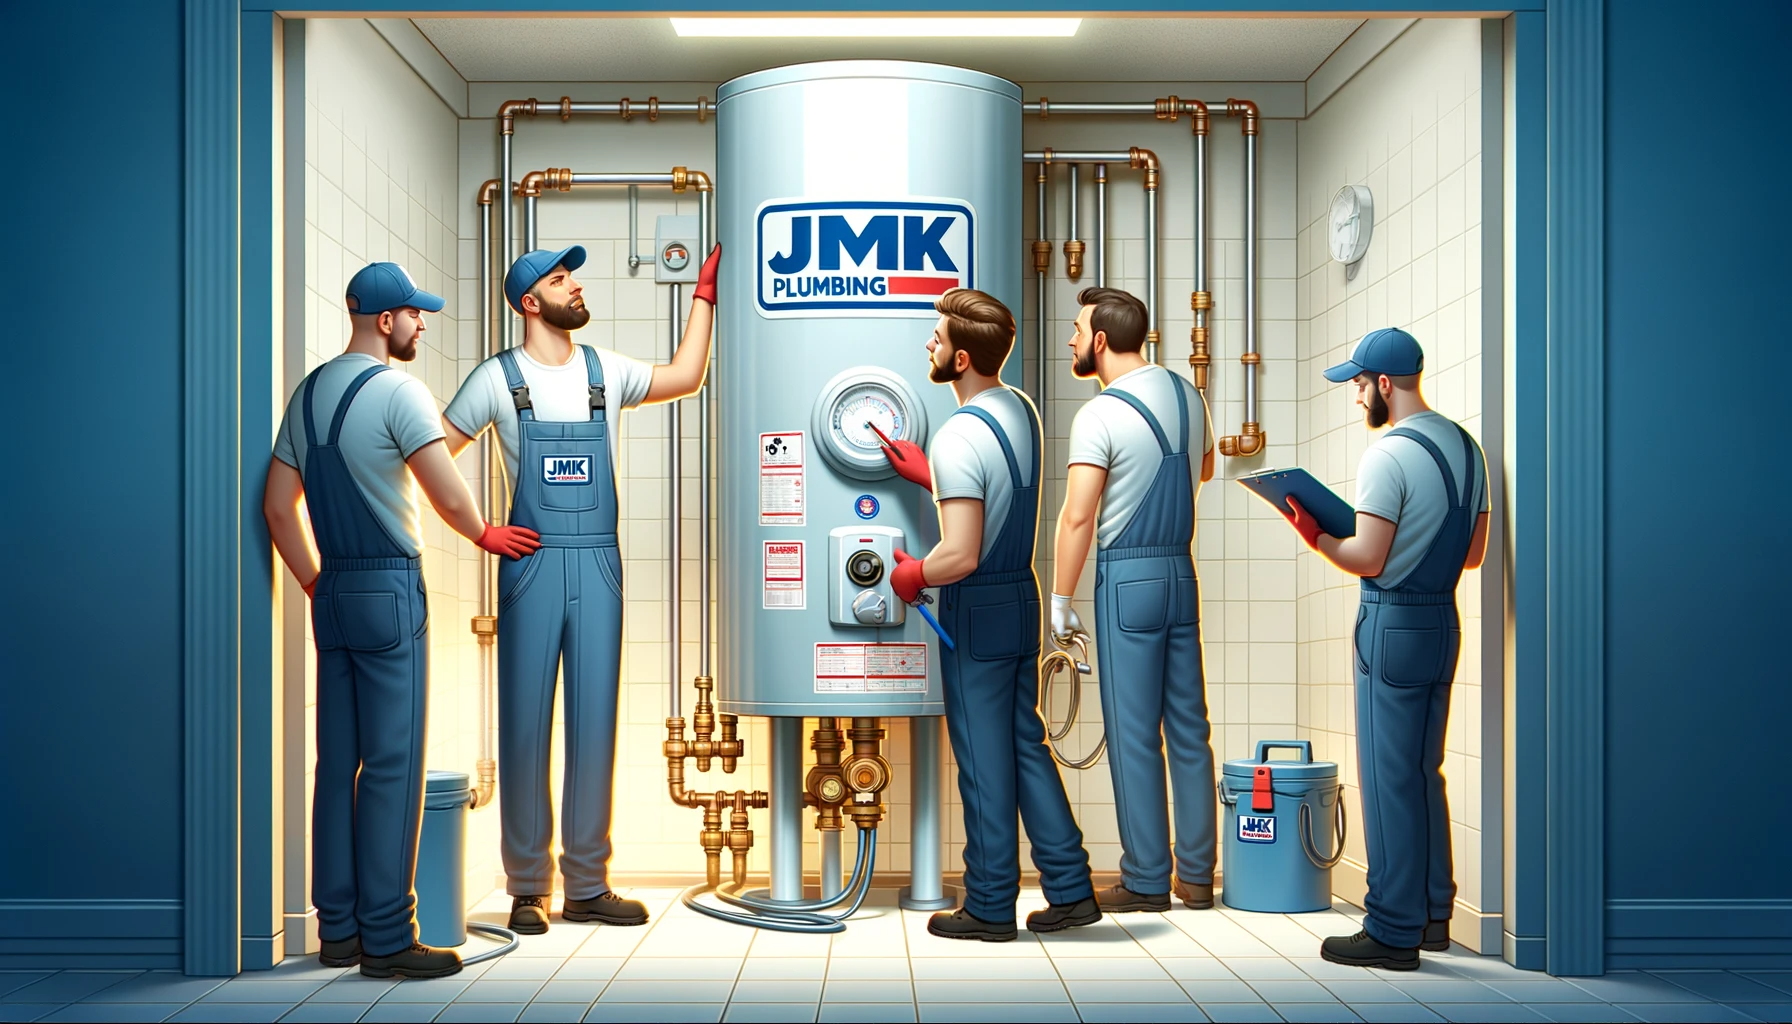 the JMK Plumbing team working on a water heater.